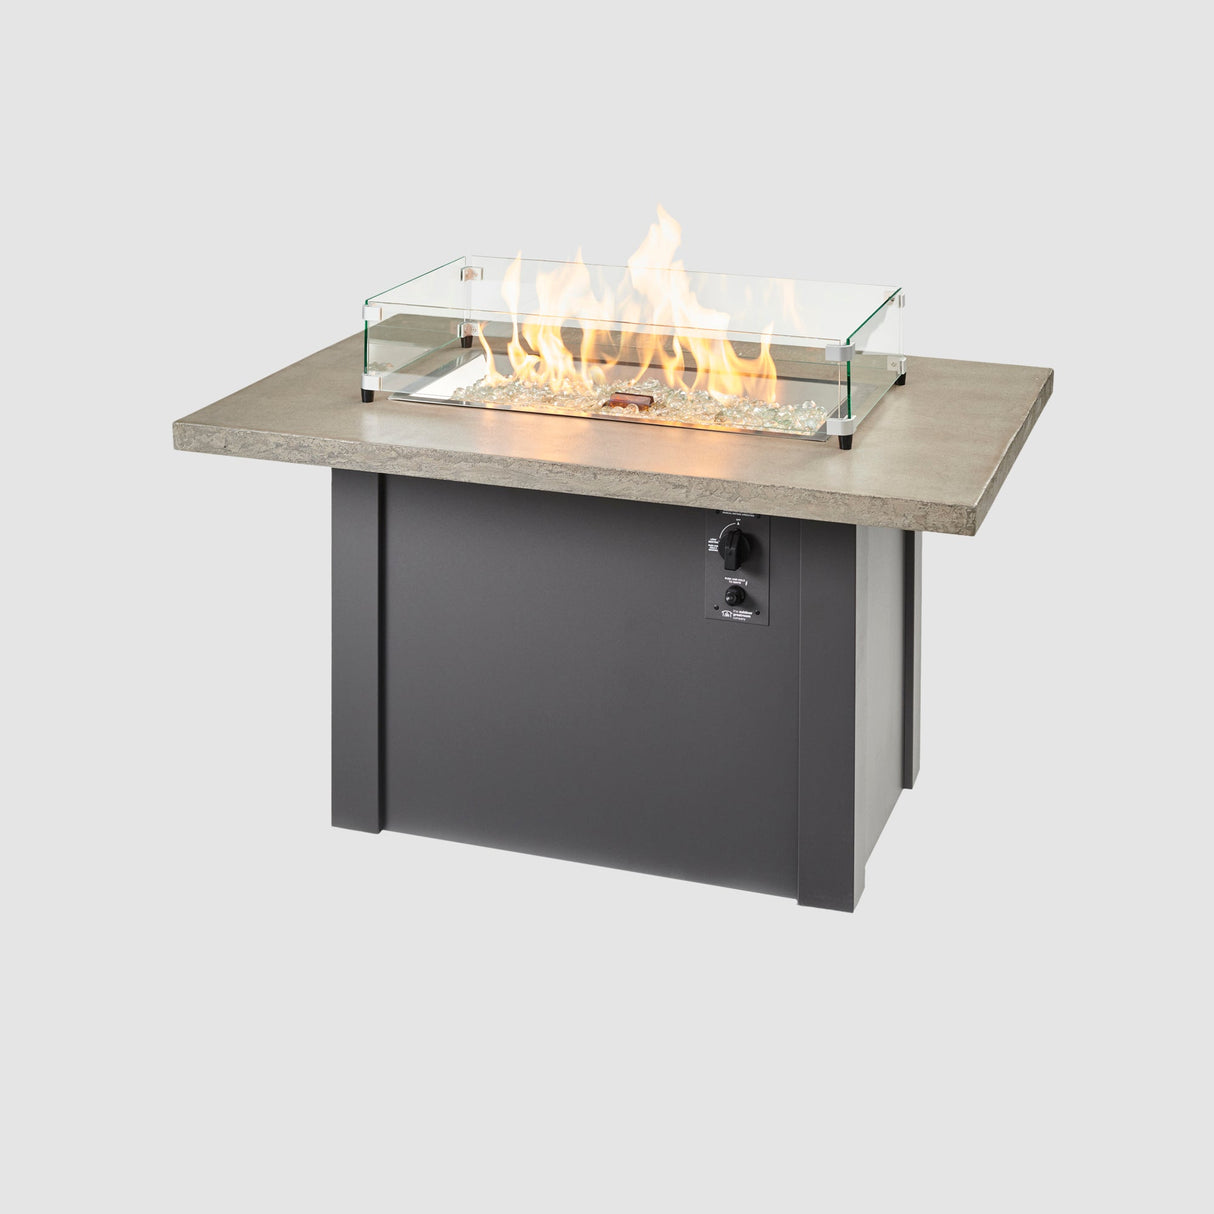 A glass wind guard used on the burner of a Havenwood Rectangular Gas Fire Table with a Pebble Grey top and Graphite Grey base